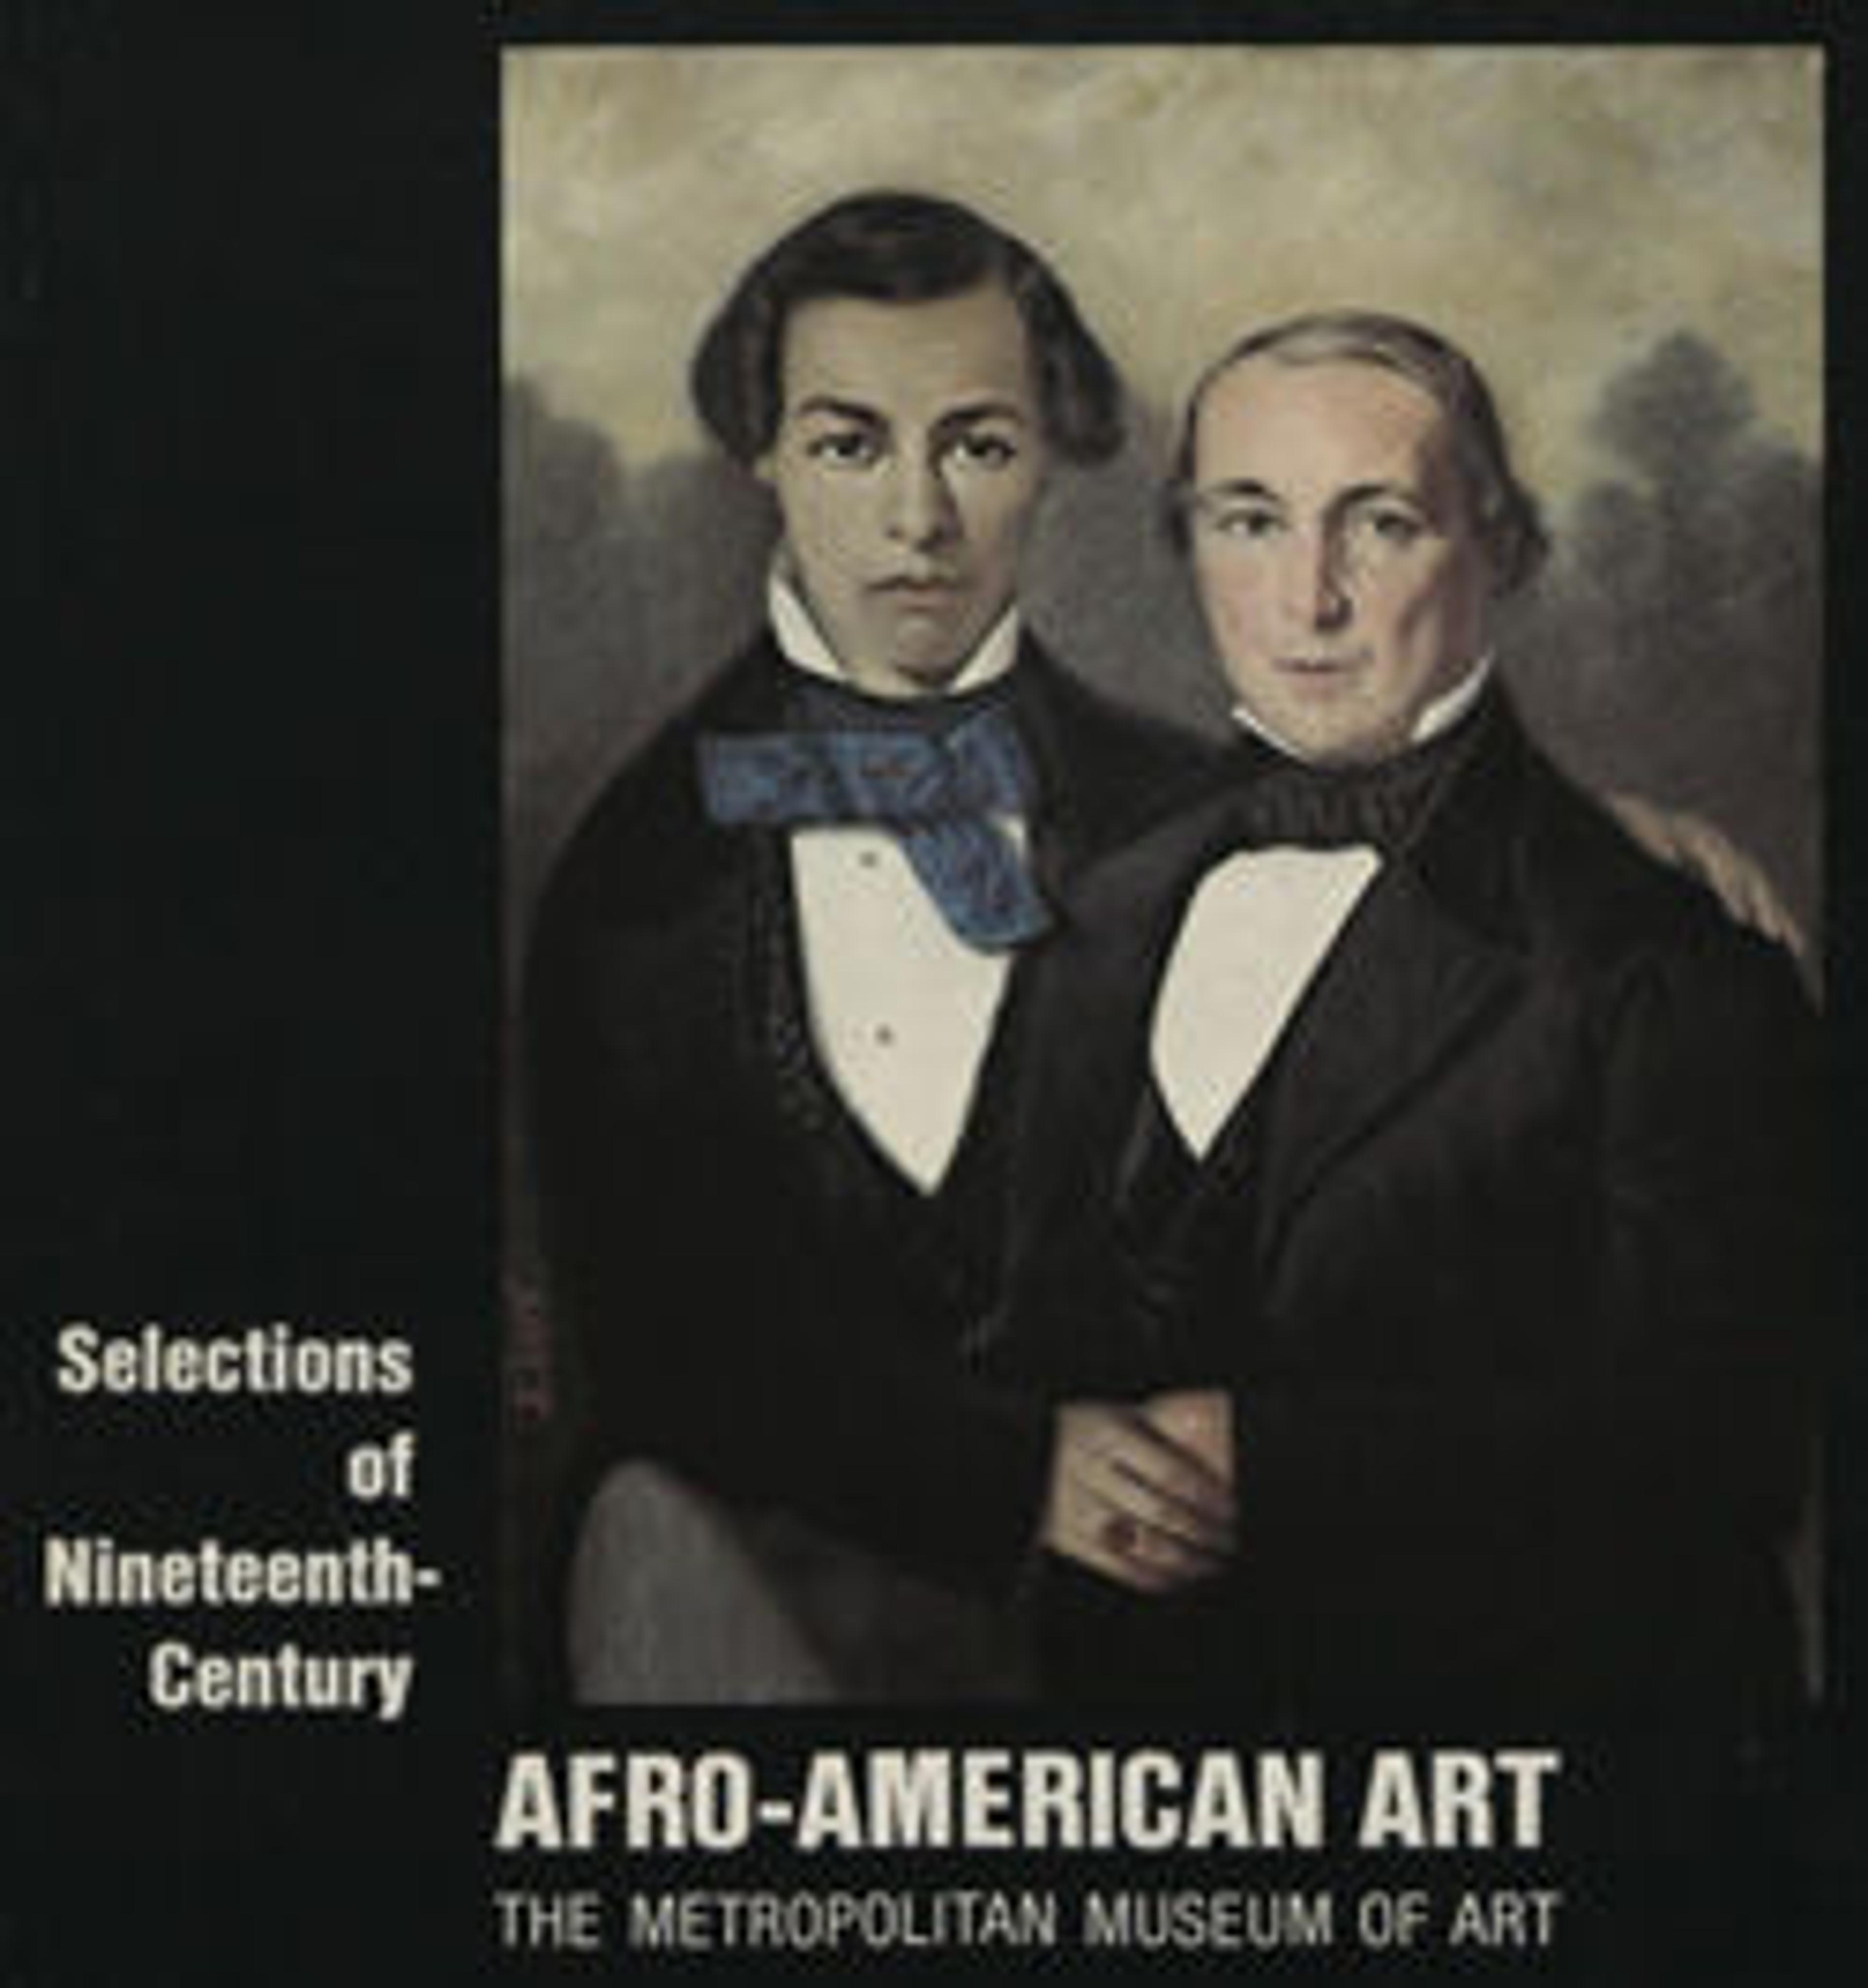 Selections of Nineteenth-Century Afro-American Art